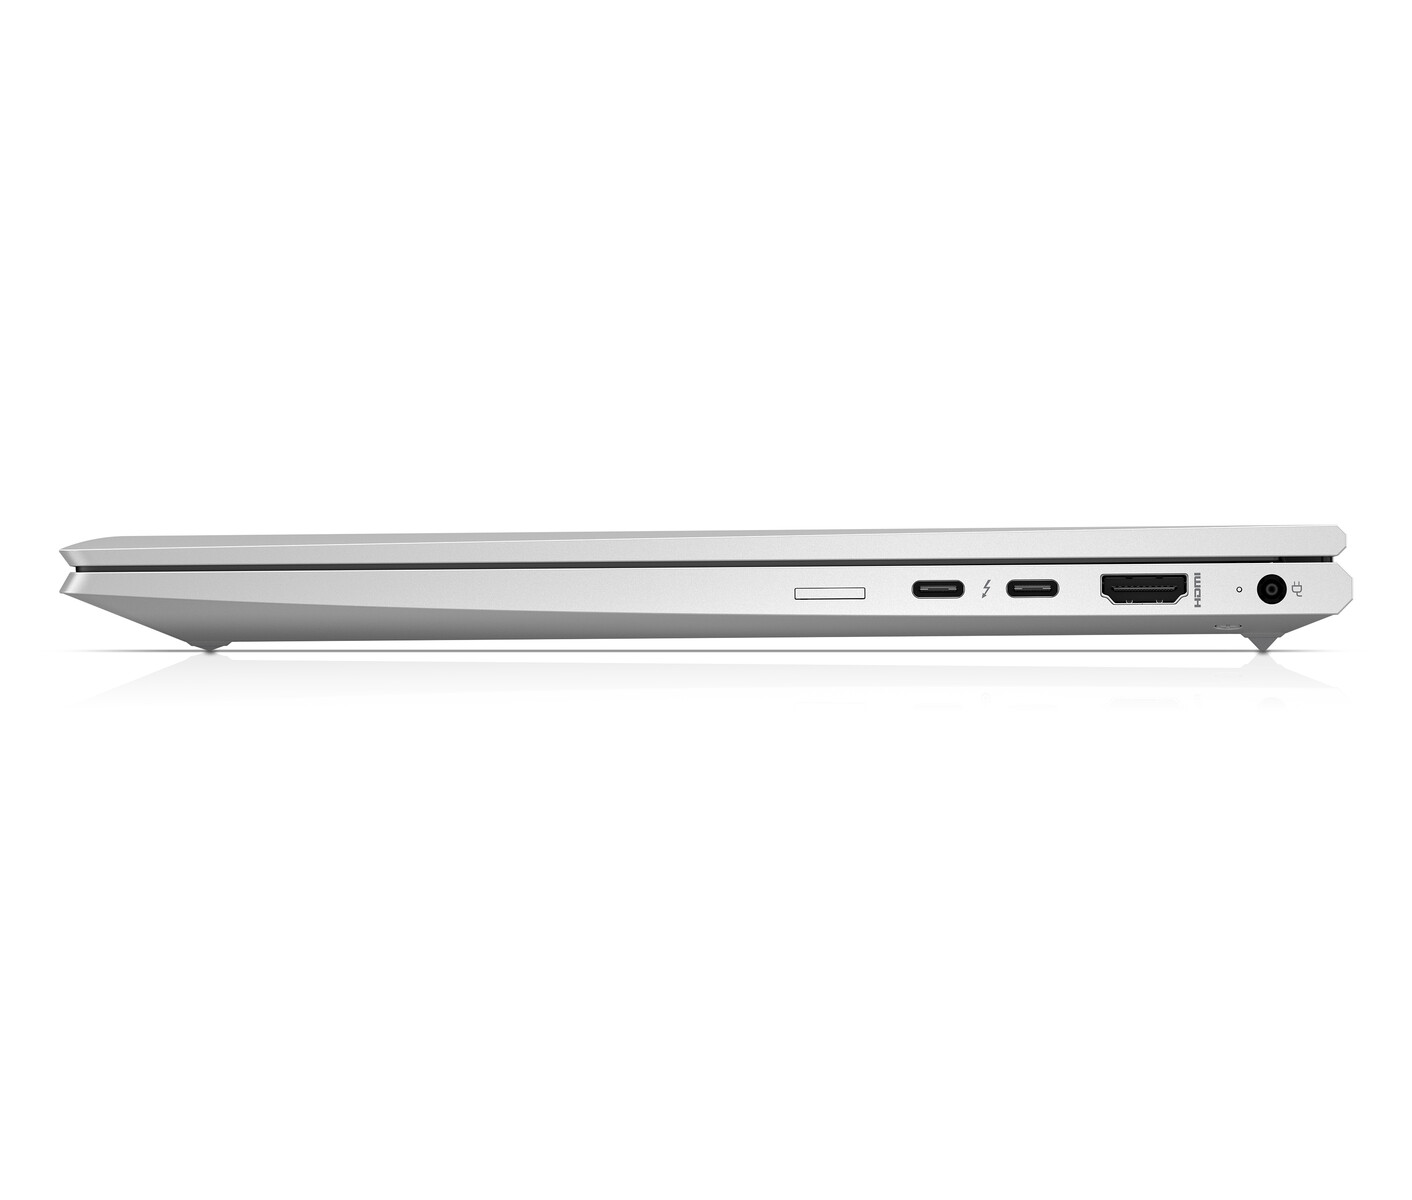 HP EliteBook 830 G8 and EliteBook 840 G8 launched with Intel Tiger Lake  CPUs, 5G-enabled nano-SIM card slot, and more - NotebookCheck.net News